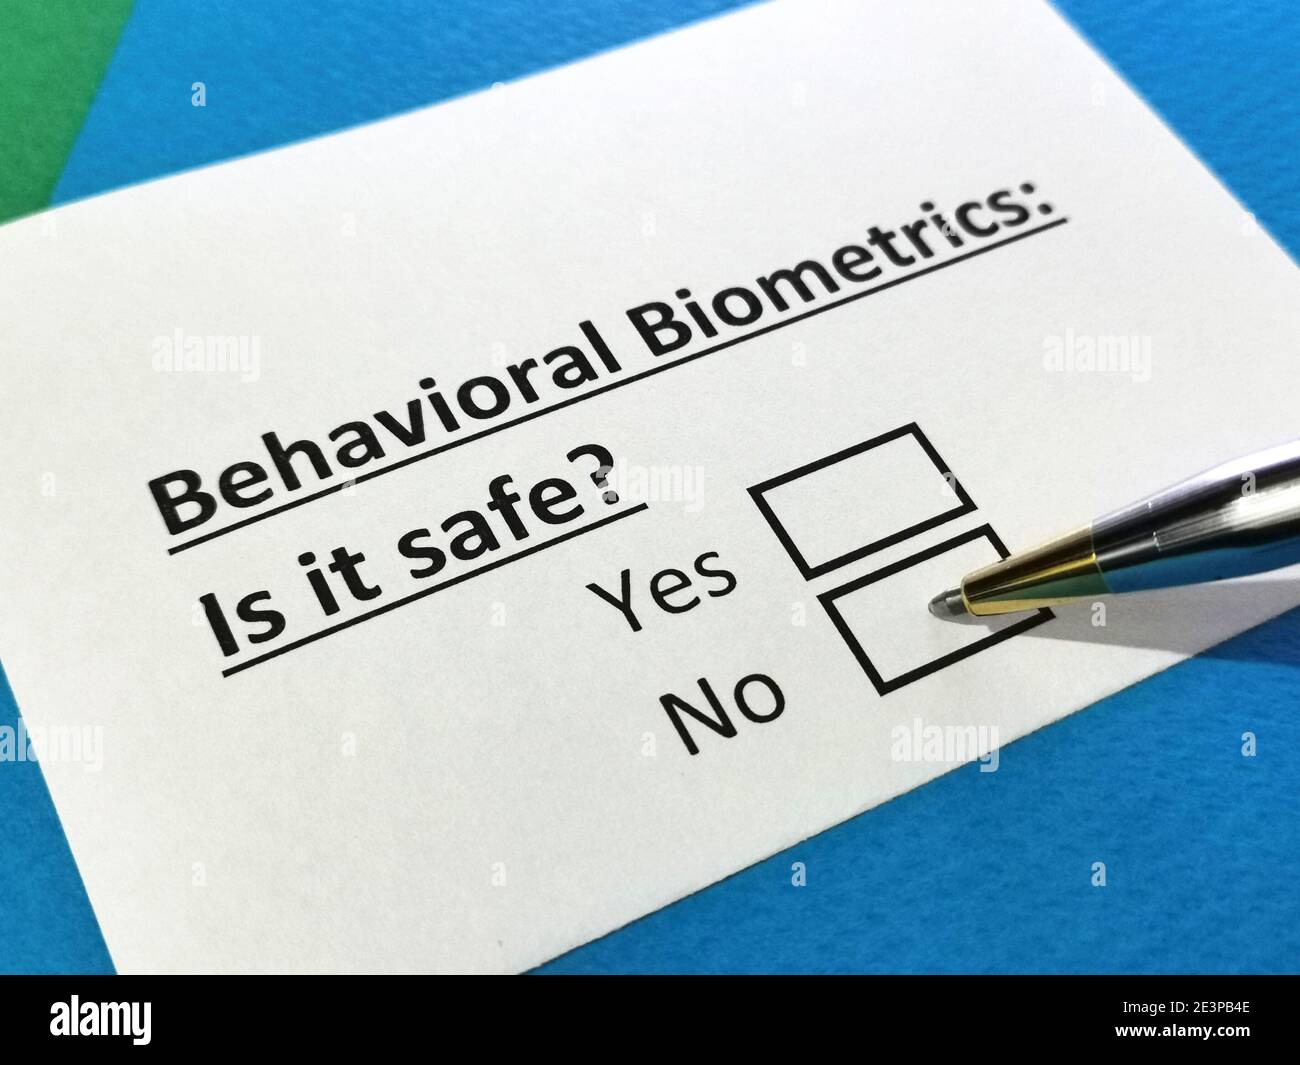 One person is answering question about behavioural biometrics. Stock Photo